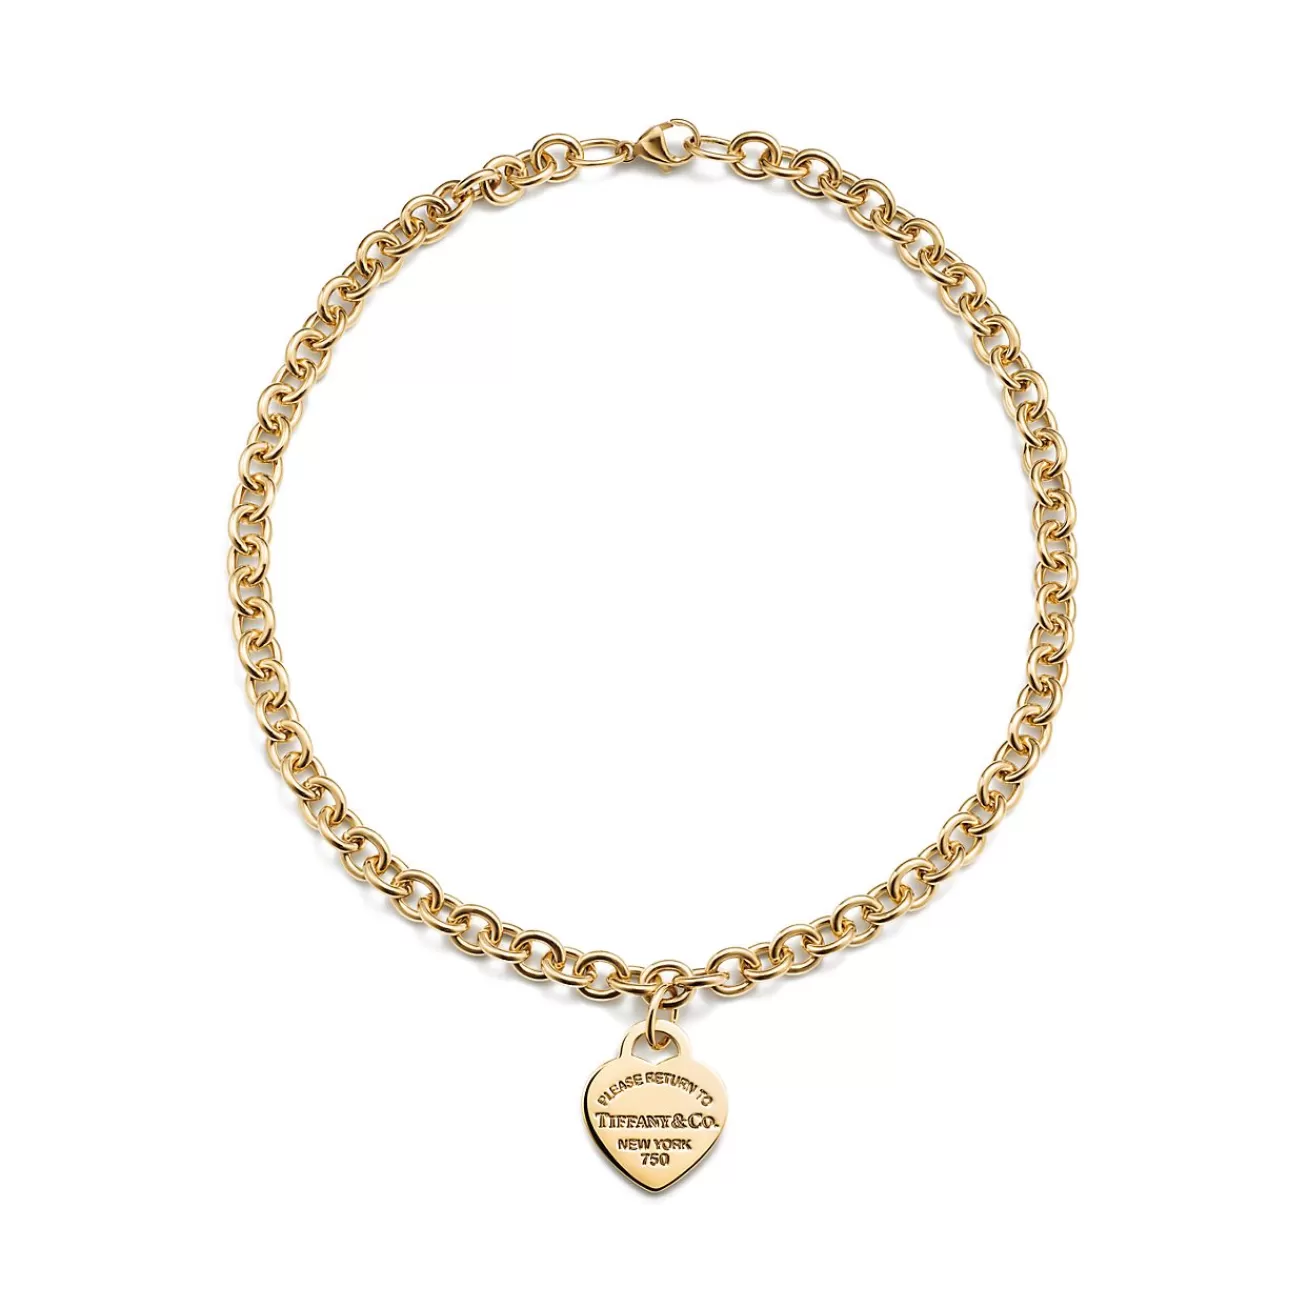 Tiffany & Co. Return to Tiffany® Heart Tag Necklace in Yellow Gold, Medium | ^ Necklaces & Pendants | Gold Jewelry